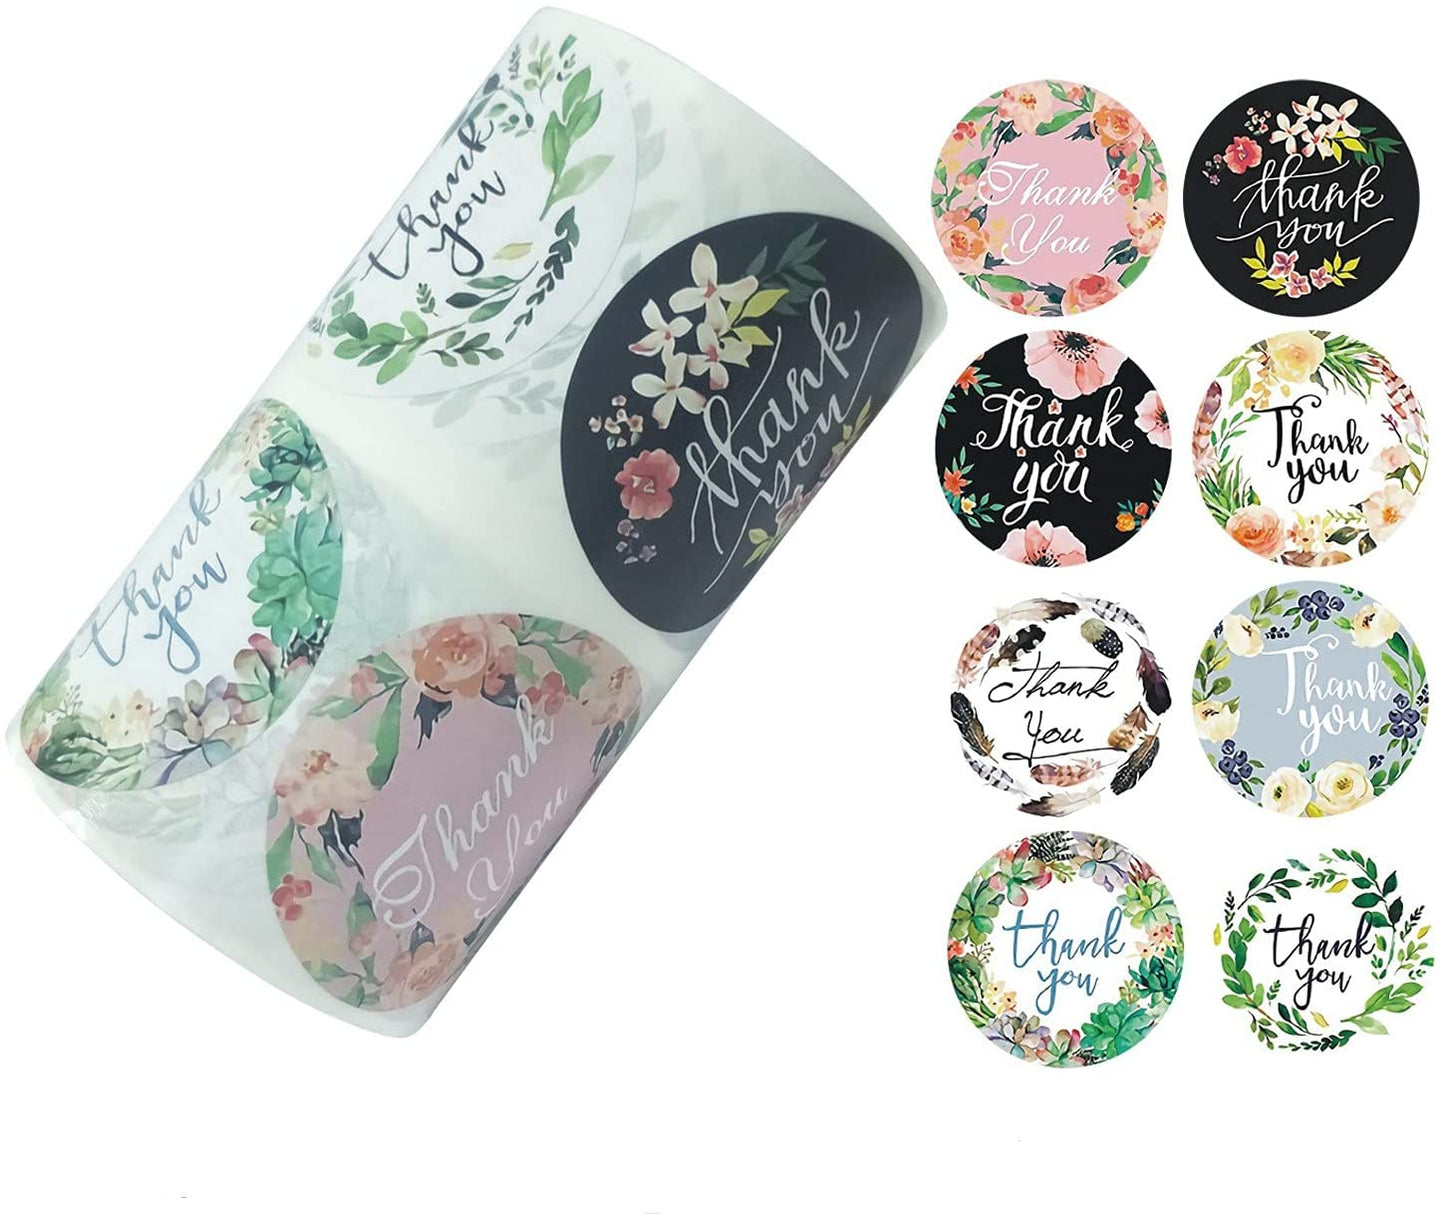 500 Pcs, 2 inches, 8 Designs, Plants and Floral, Round Label, Thank You Sticker